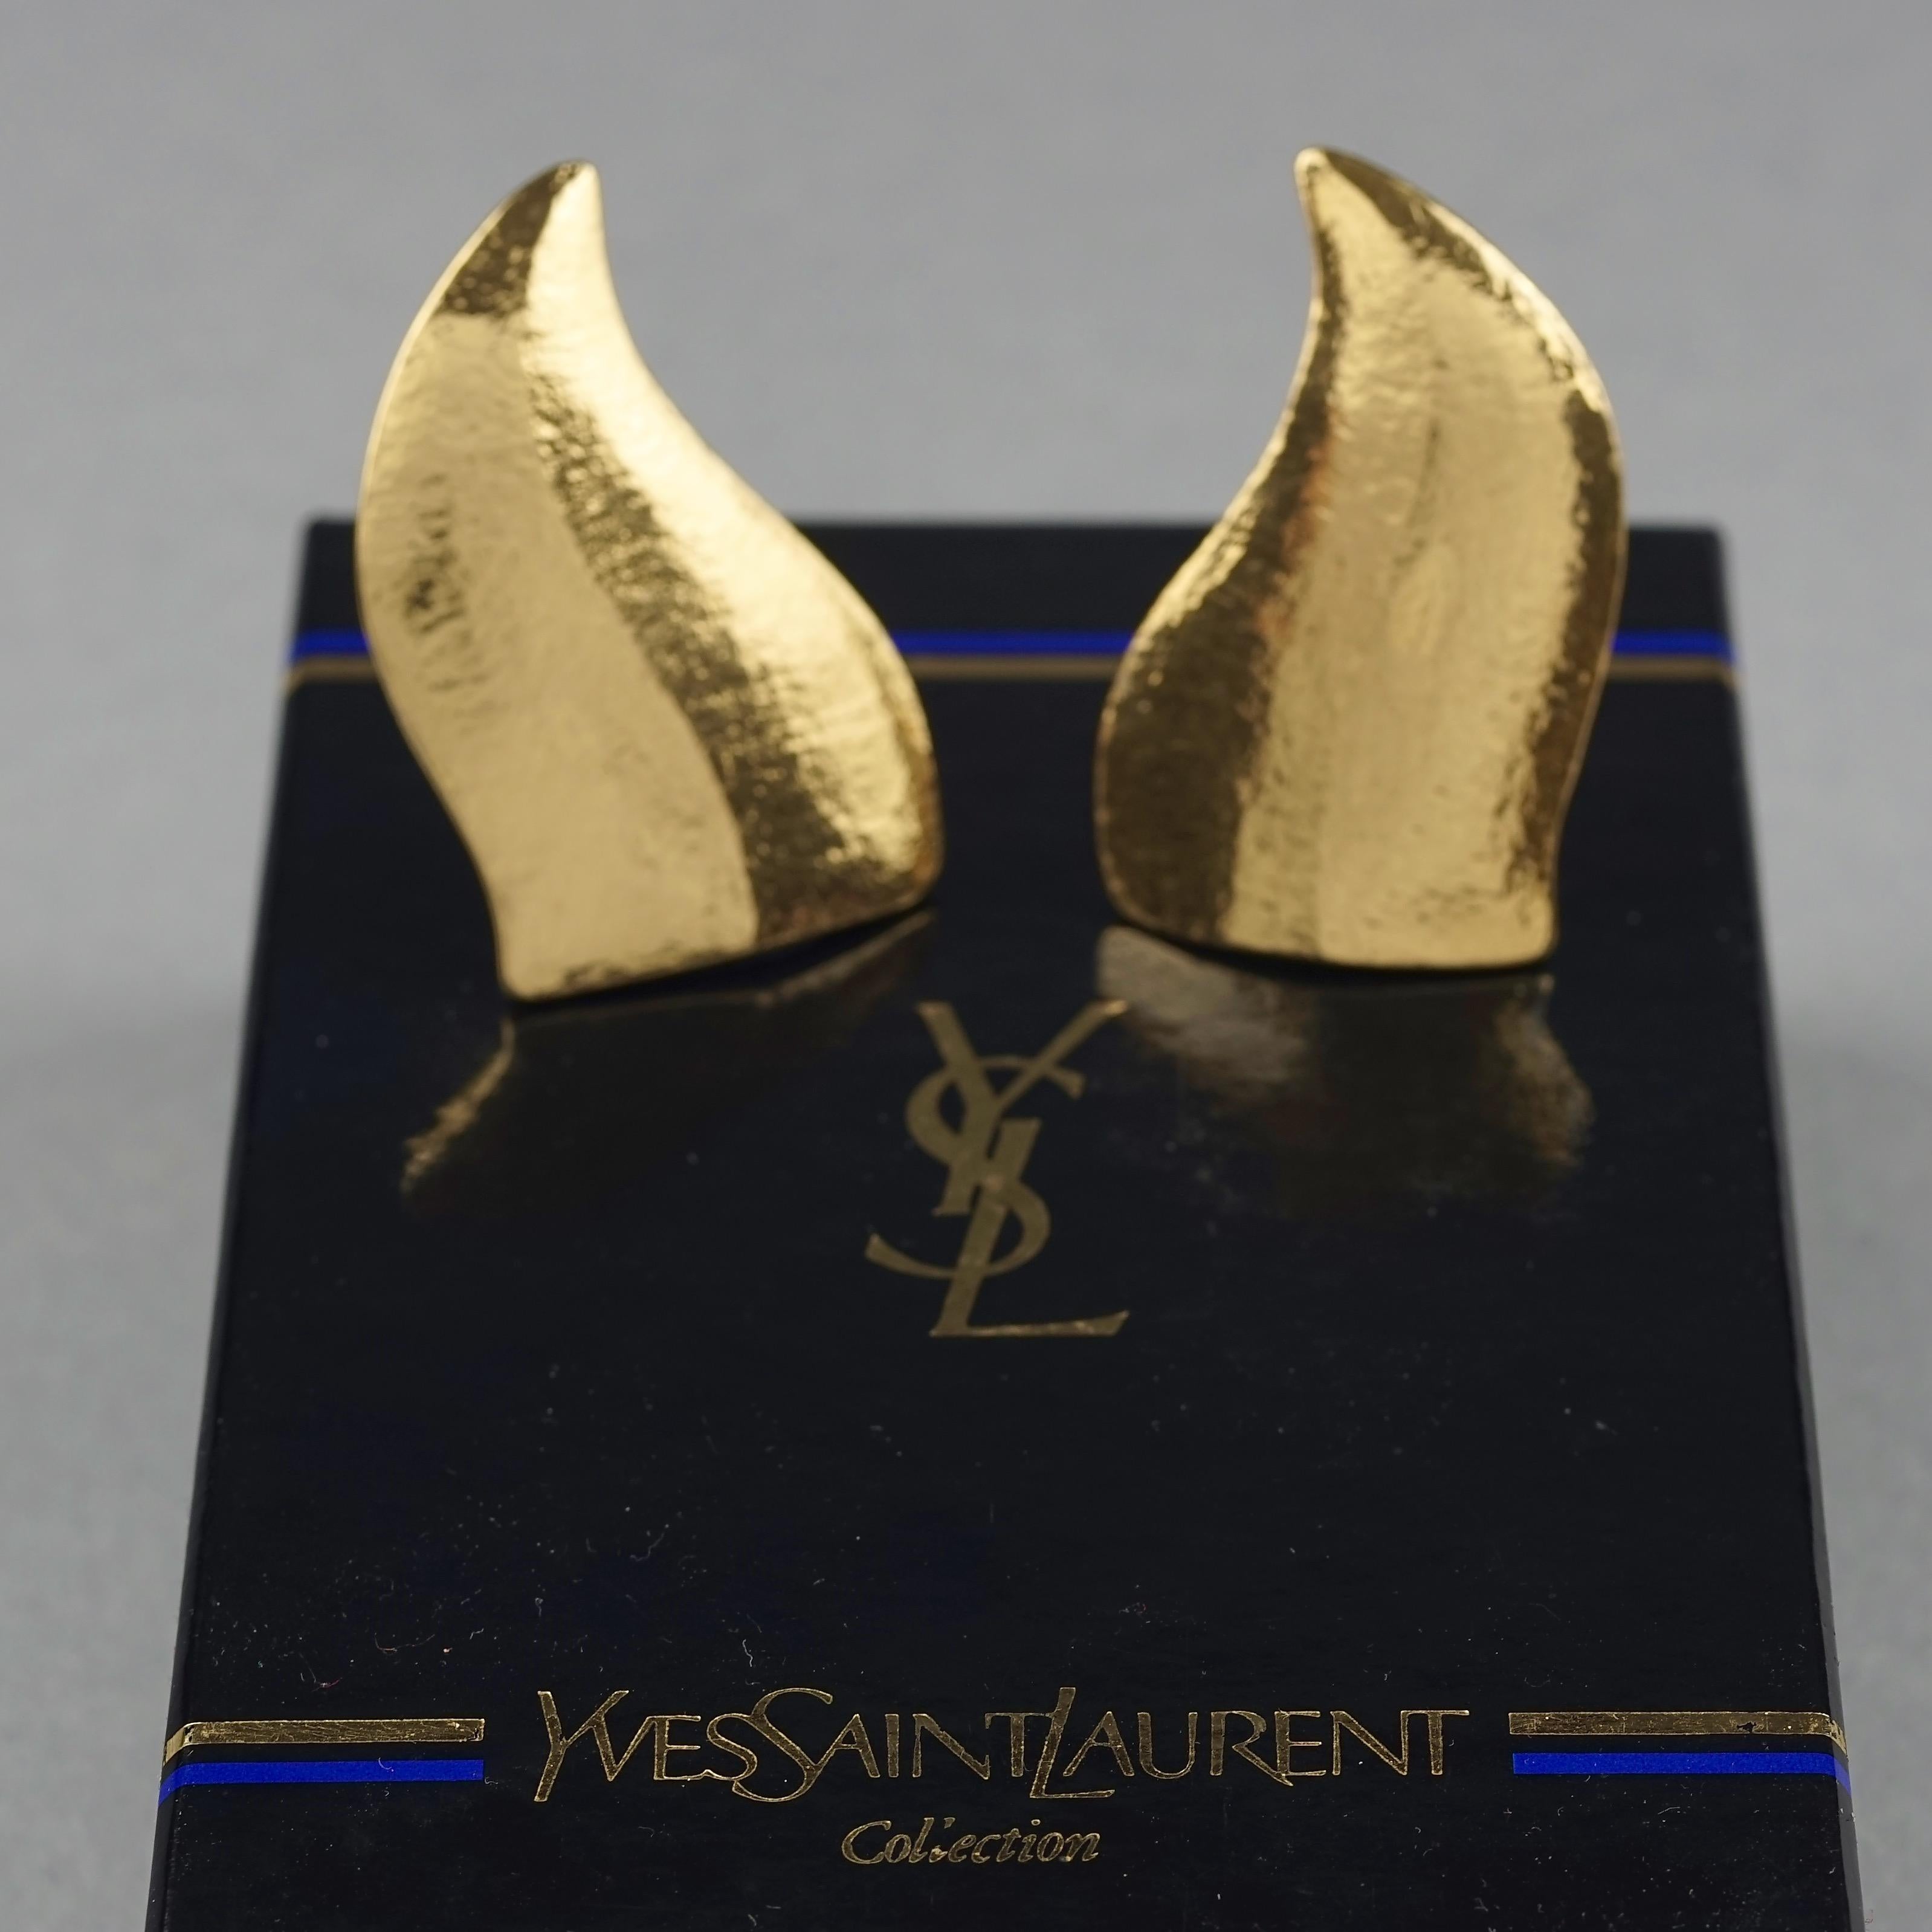 Vintage YVES SAINT LAURENT Ysl by Robert Goossens Flame Earrings In Excellent Condition For Sale In Kingersheim, Alsace